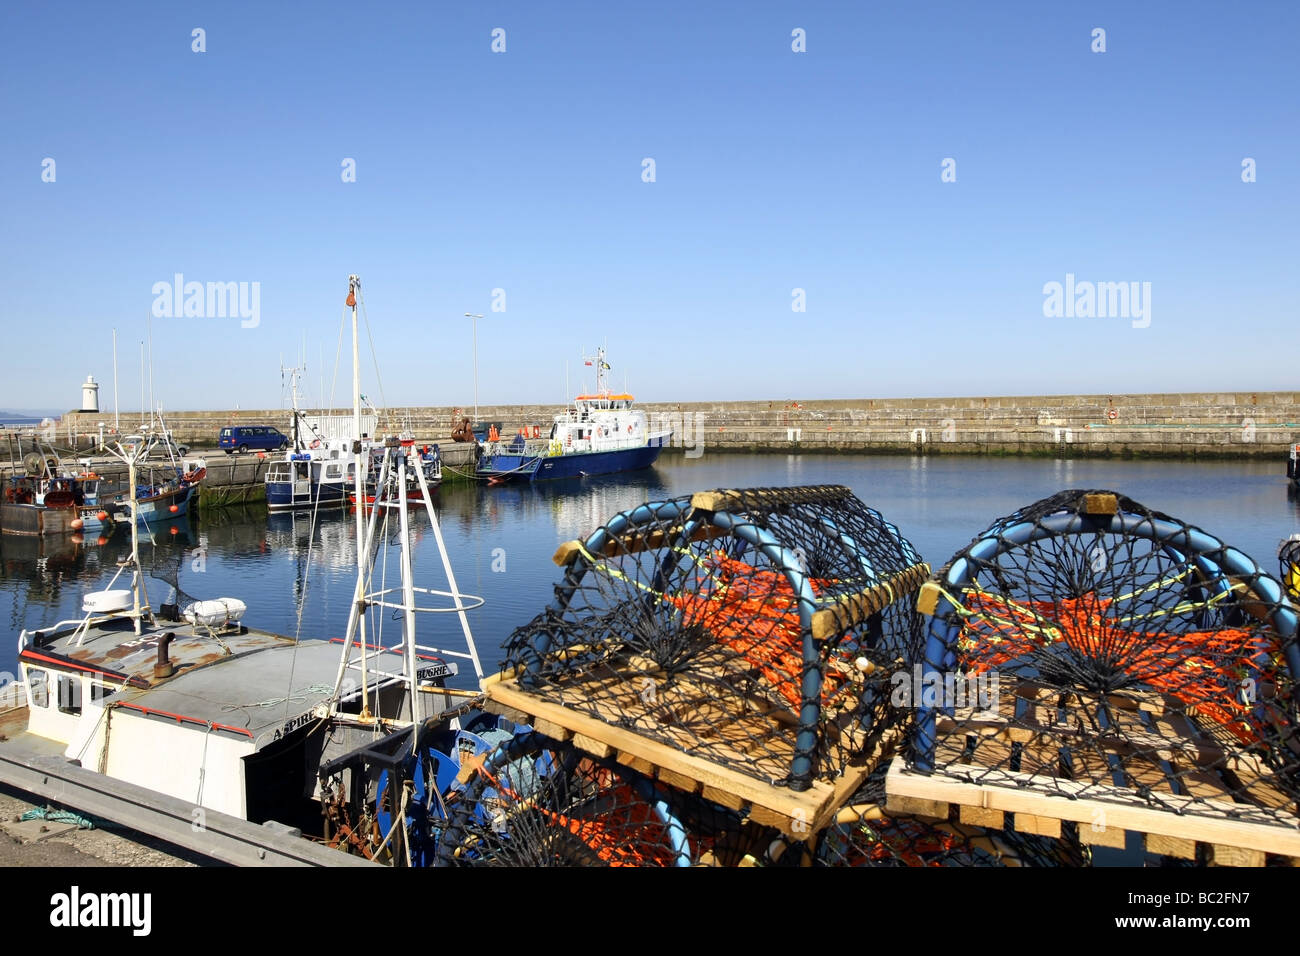 The harbour of the fishing town of Buckie, Aberdeenshire, Scotland, UK Stock Photo